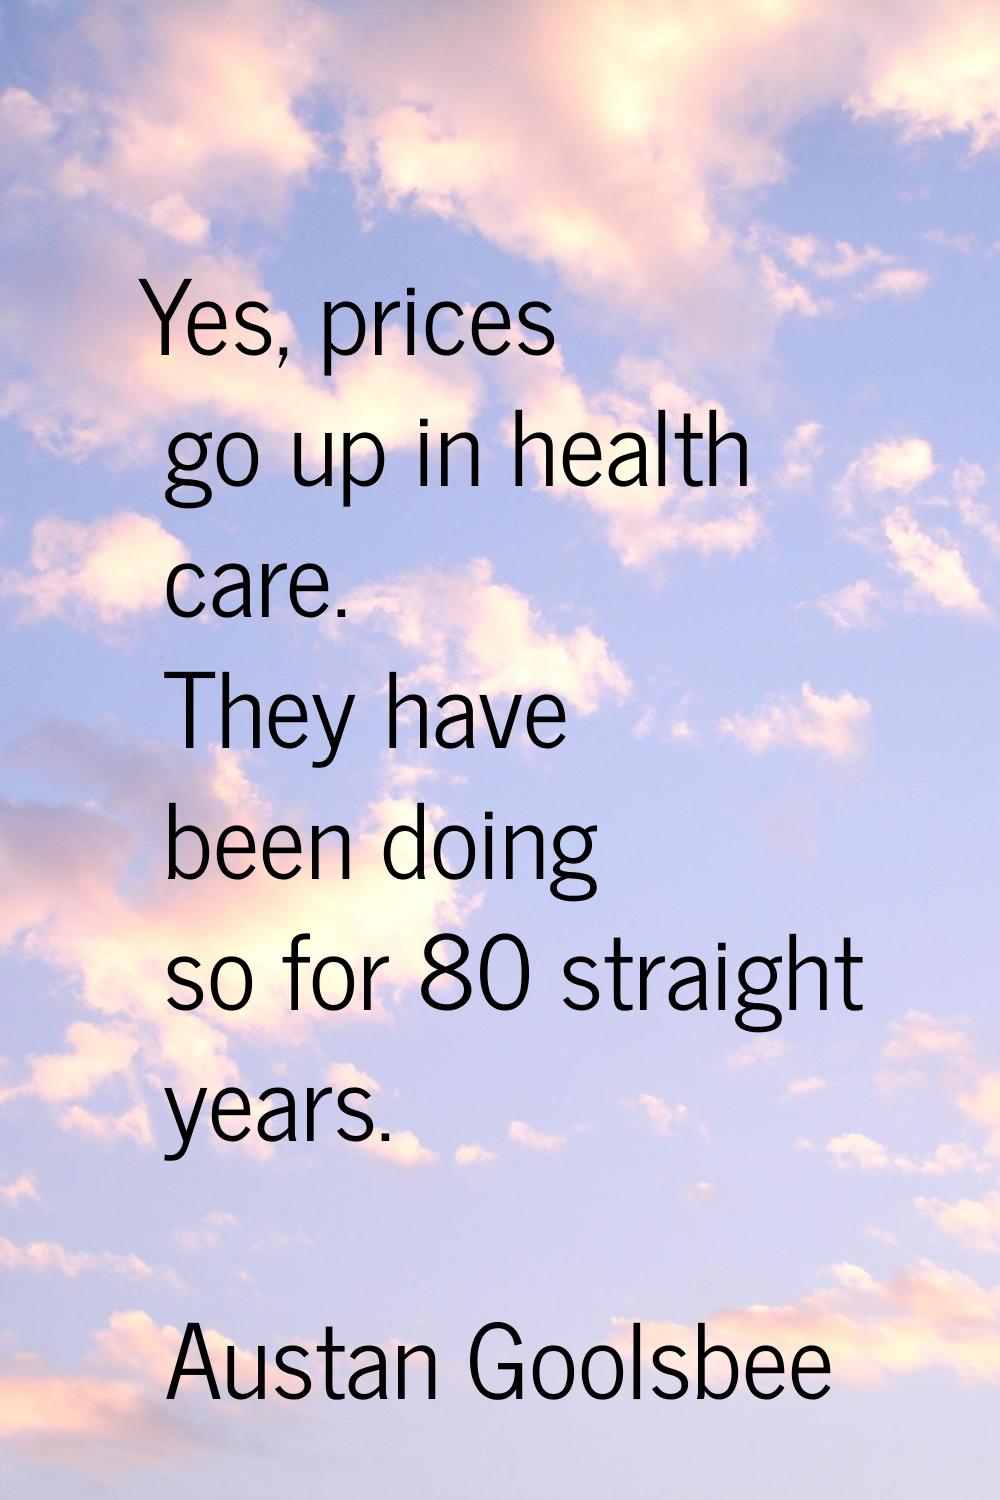 Yes, prices go up in health care. They have been doing so for 80 straight years.